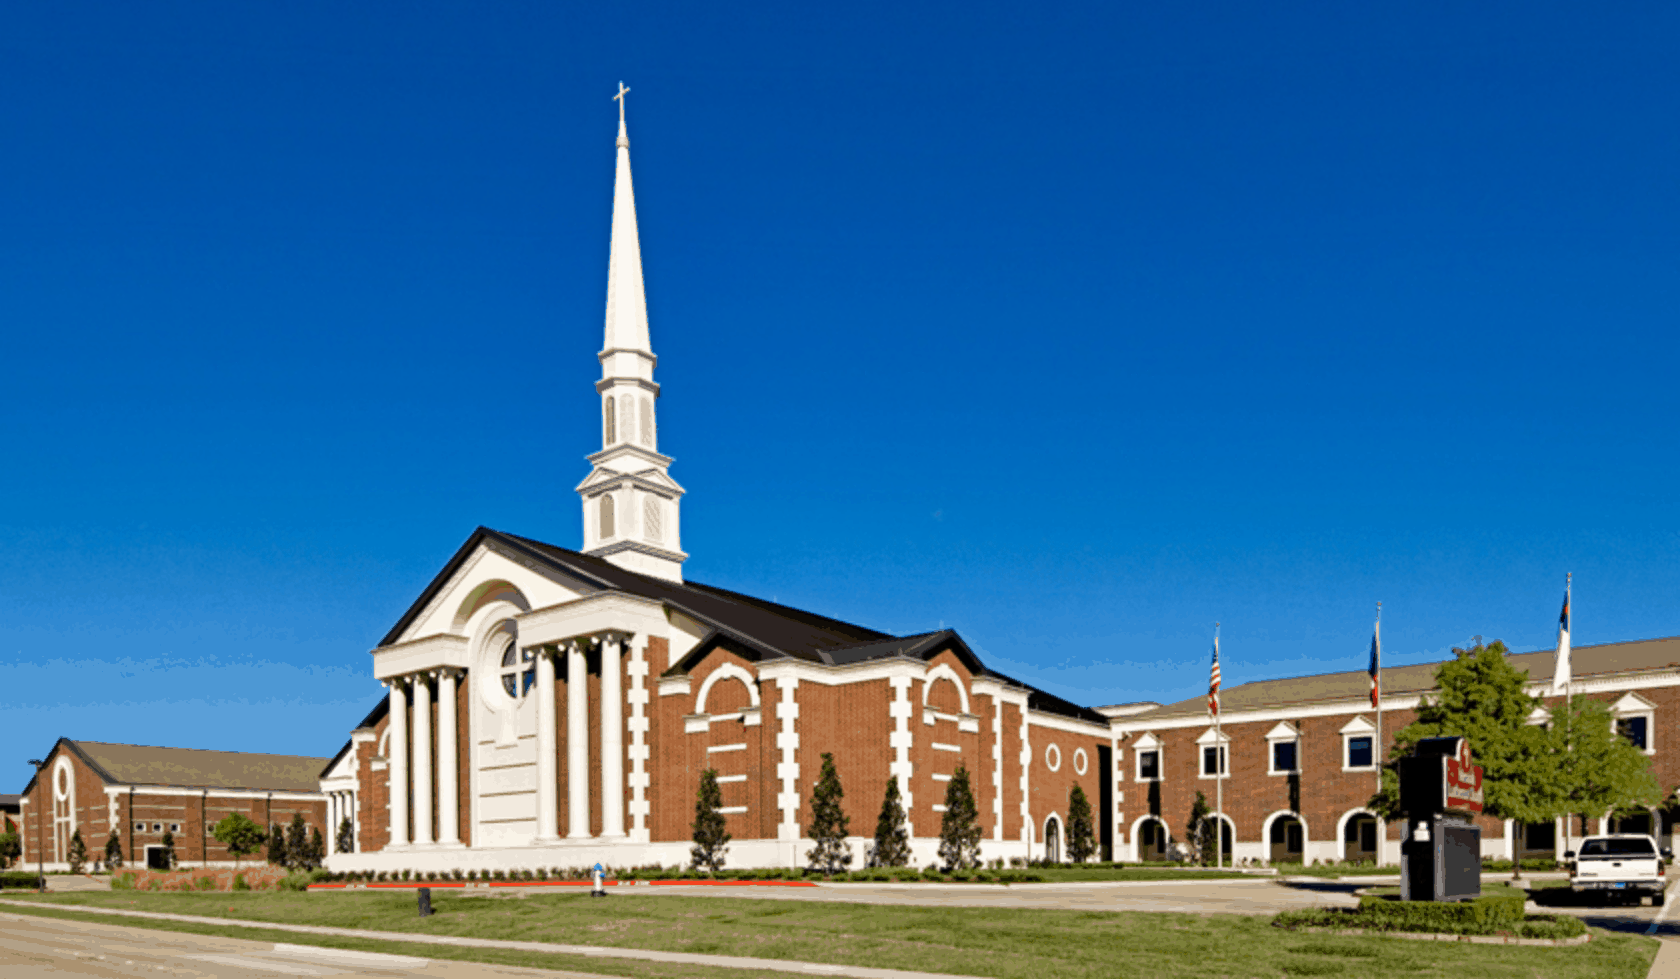 Front view of Messiah Lutheran grounds, with the center focus on the main building with tall white steeple